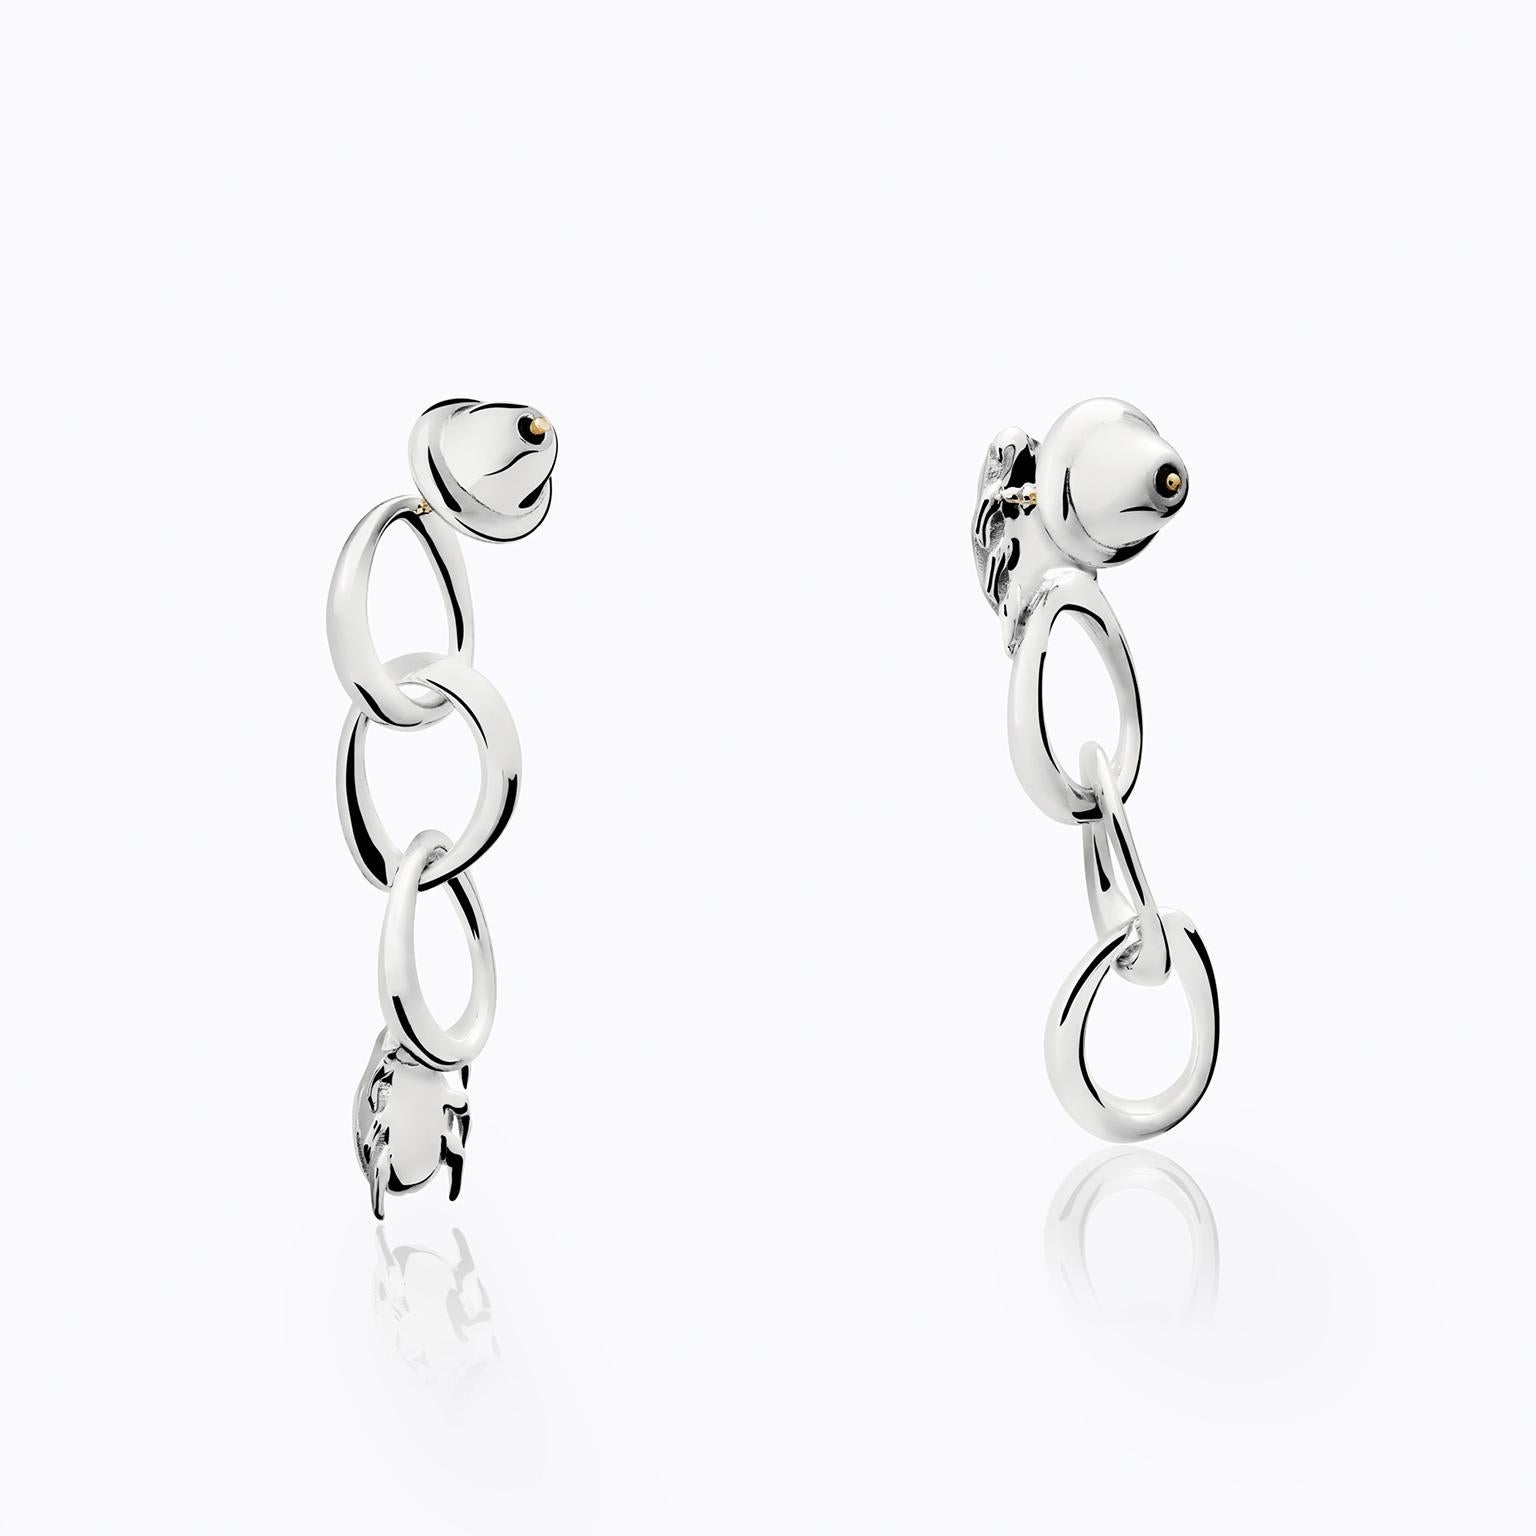 The Beetle Earrings from the Animal´s Collection by TANE are made in silver .925. They are composed of a series of links inspired by nature, designed especially for the collection. Each earring features a Beetle, sculpted in every detail of its